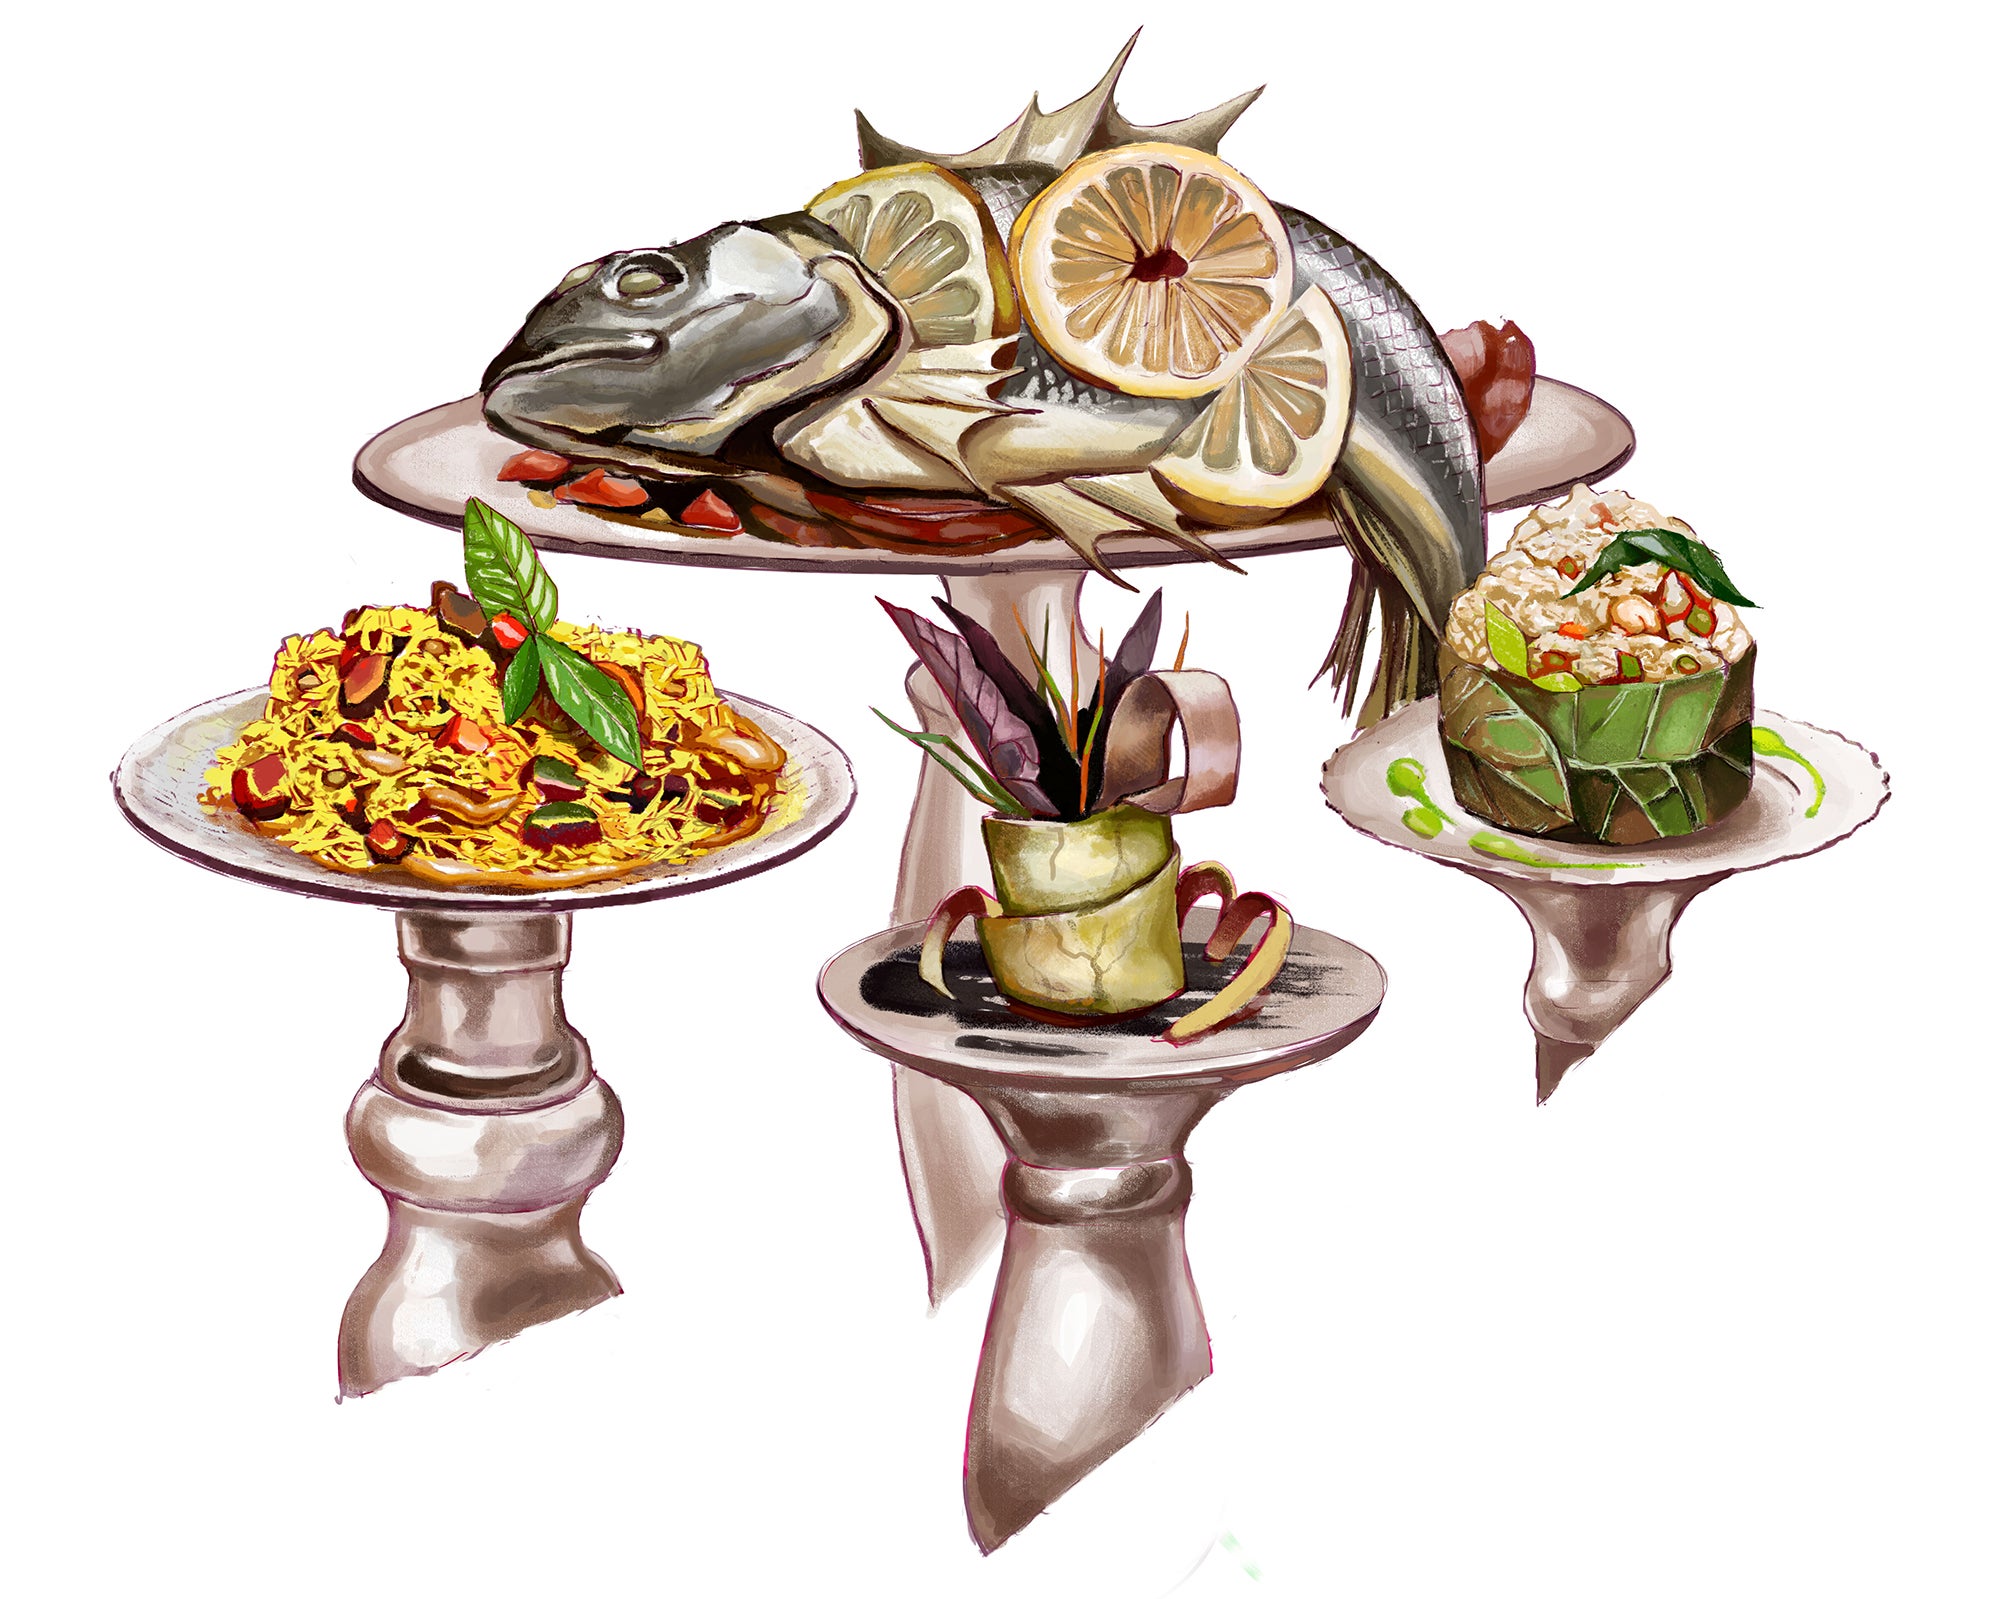 A set of small entrees sits on top of decorative podiums. The main dish, a whole fish with layers lemons, on the front left a pasta dish dotted with meat and a leafy garnish on top, the center a decorative plant dish, and on the far right, a dish wrapped in a leaf and dotted with vegetabless